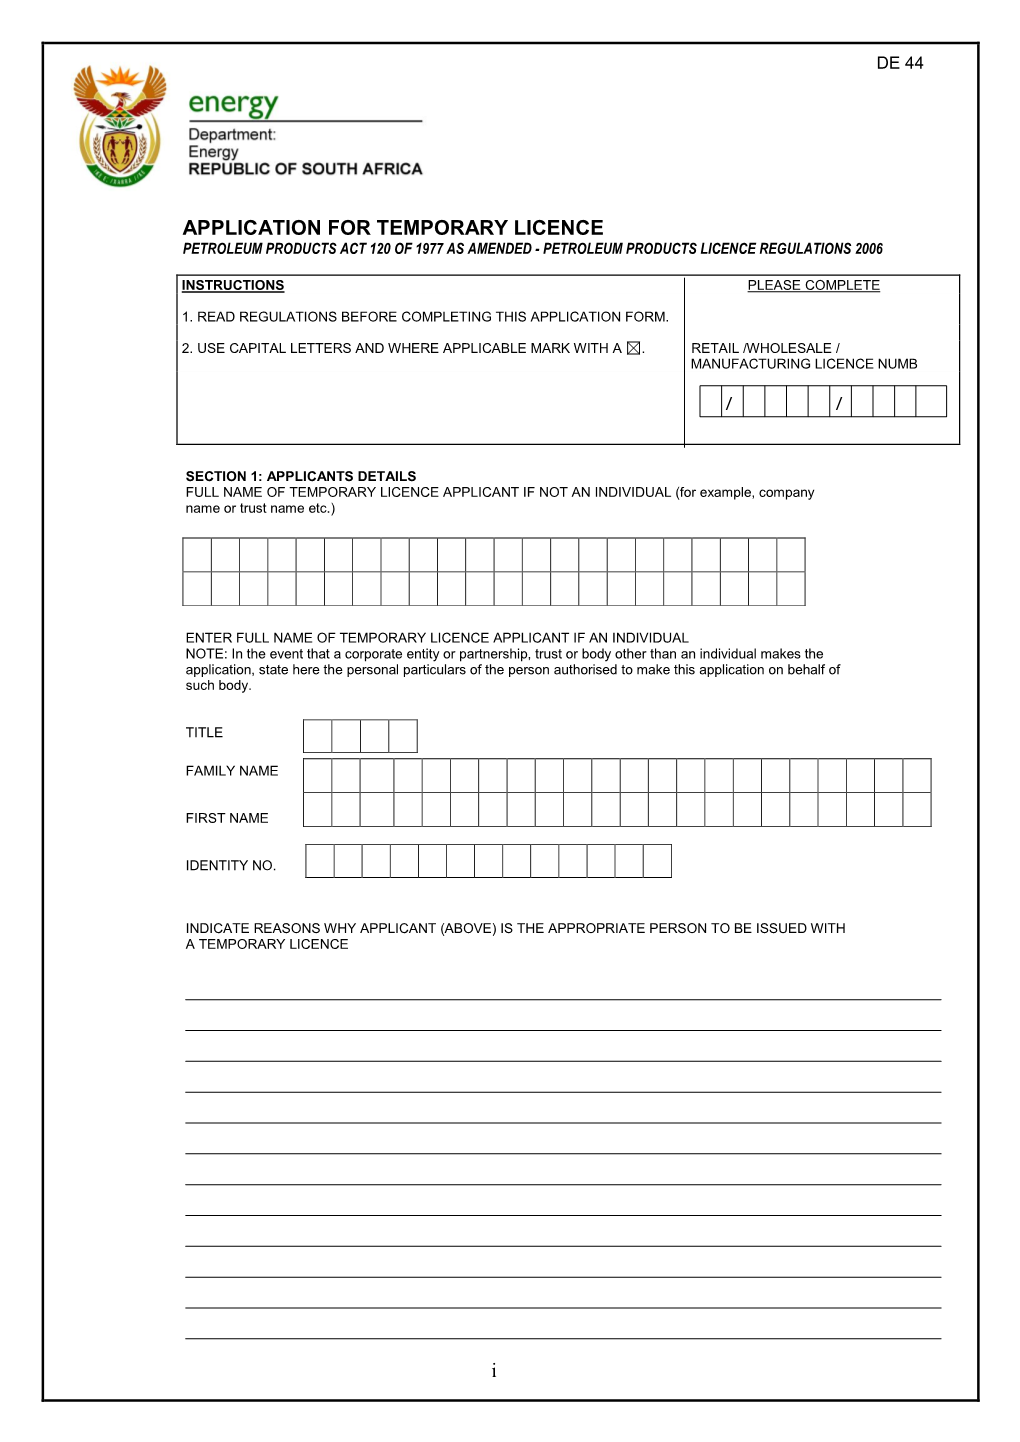 I APPLICATION for TEMPORARY LICENCE